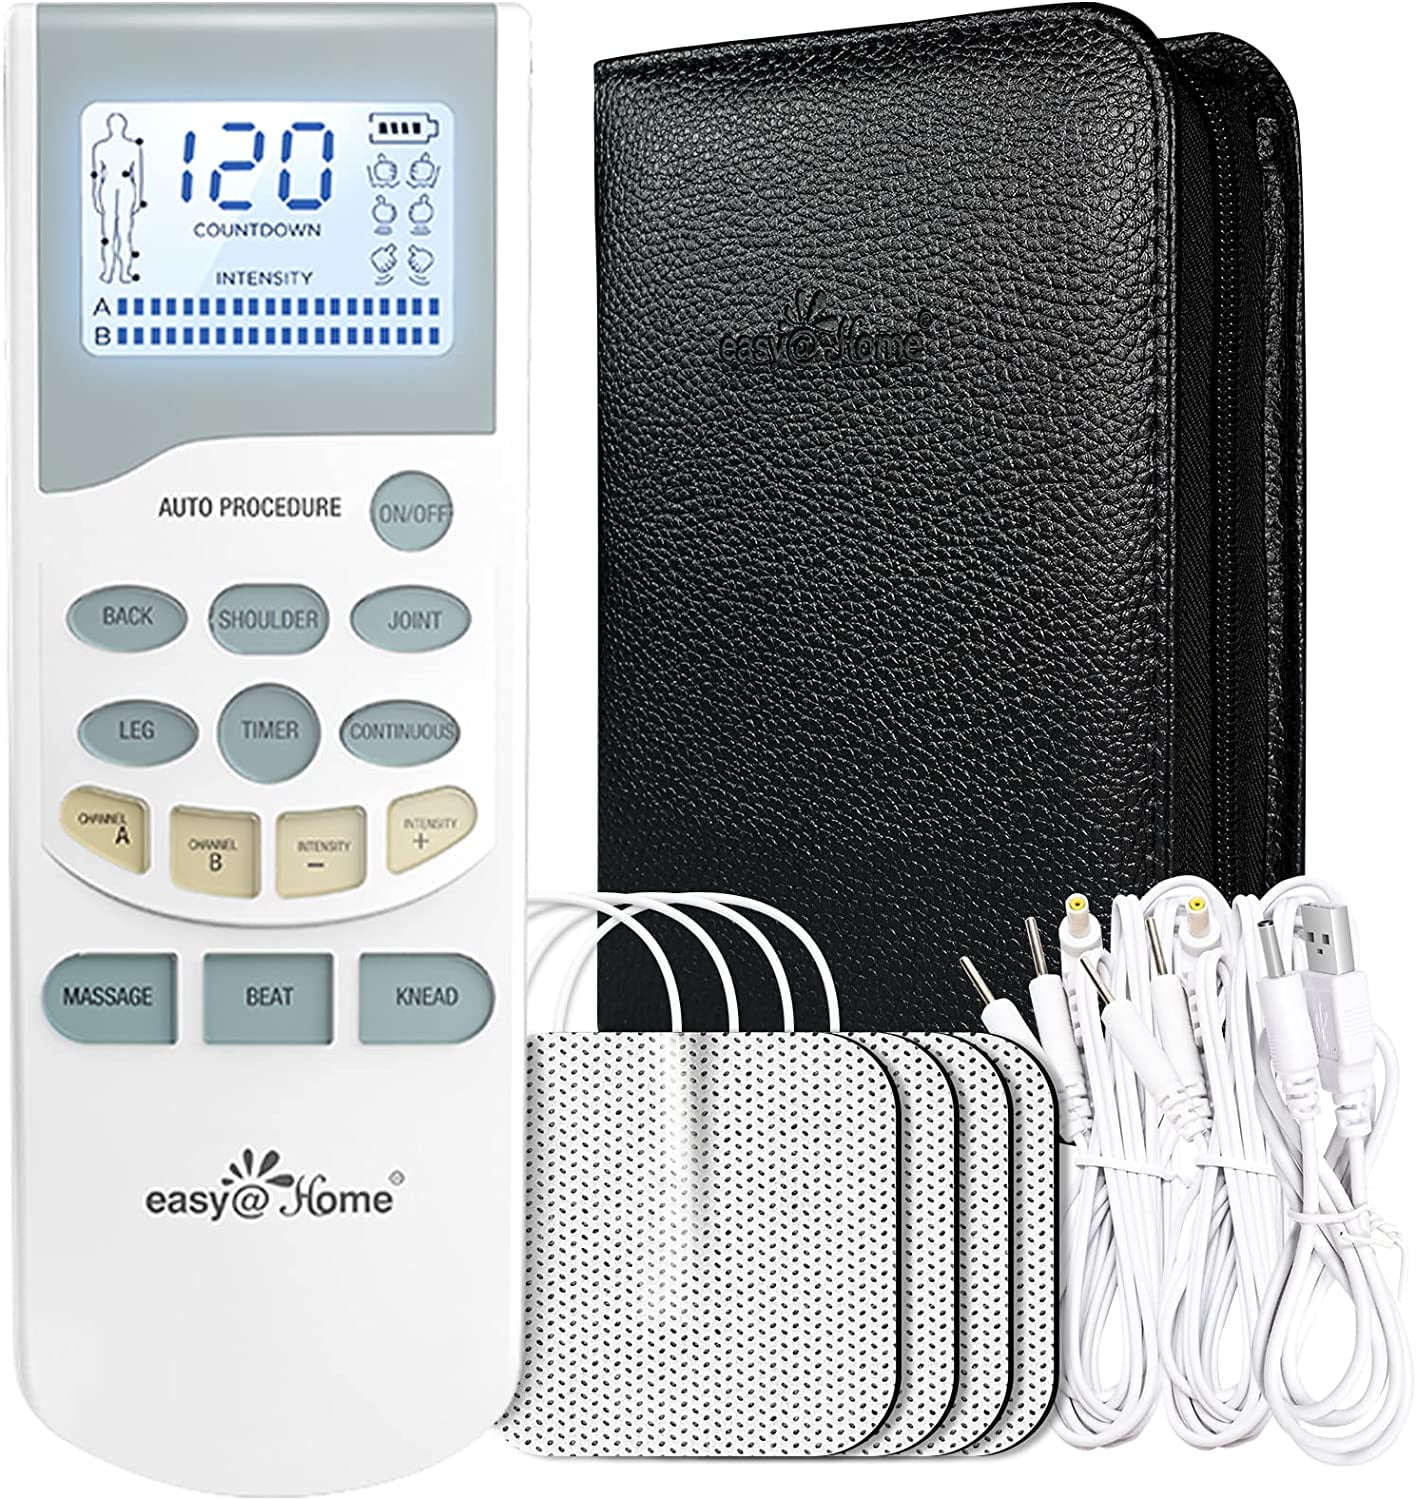 Easy@Home TENS Unit, 16 EMS/TENS Massage Modes, 20 Intensity Levels -  EHE029N, 5x5x5 - Fry's Food Stores